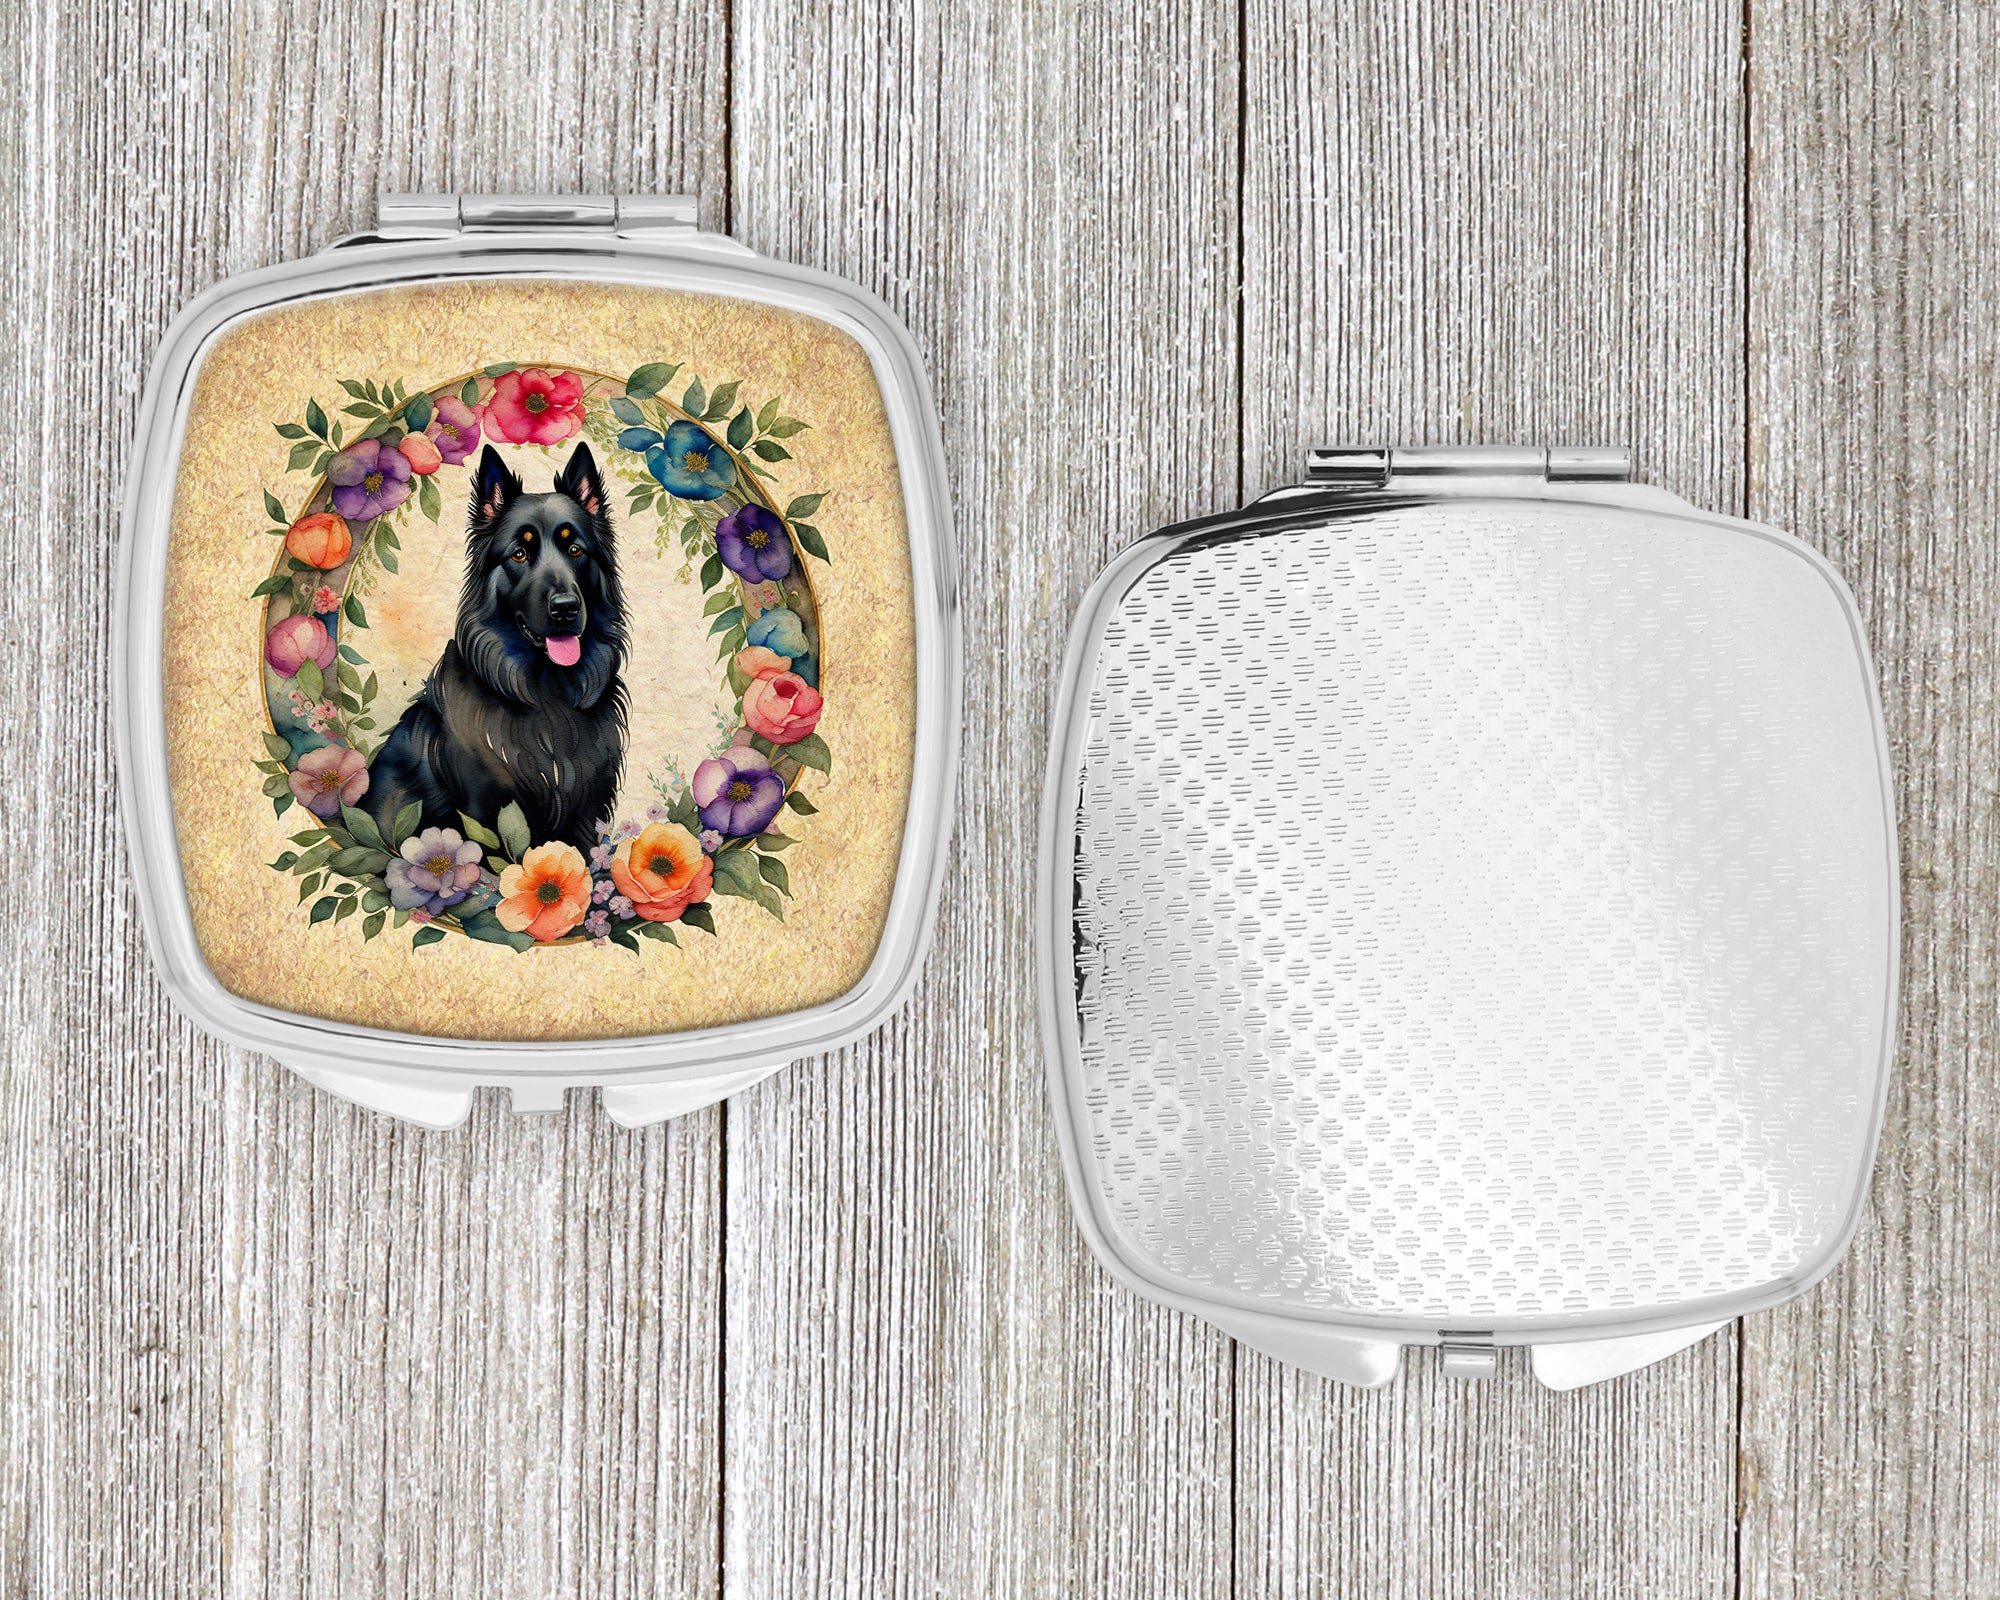 Belgian Sheepdog and Flowers Compact Mirror